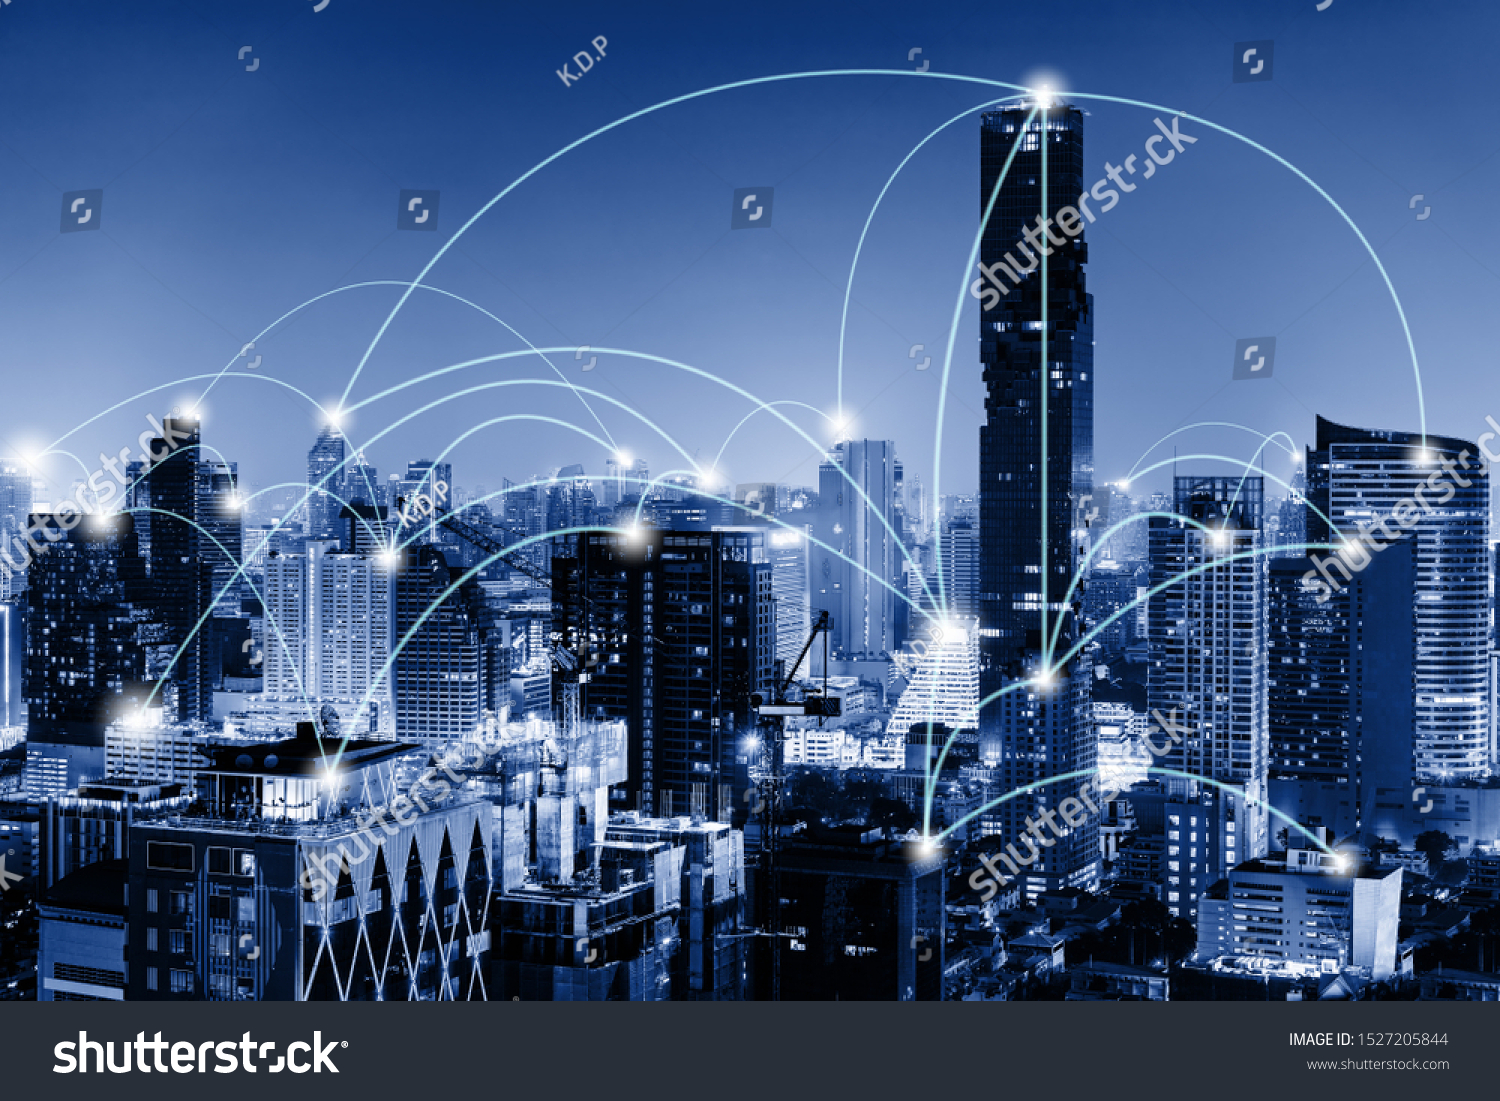 Network Telecommunication and Communication Connect Concept, Connection 5G Networking System of Infrastructure and Cityscape at Night Scenery. Technology Digital Connectivity and Information Transfer #1527205844